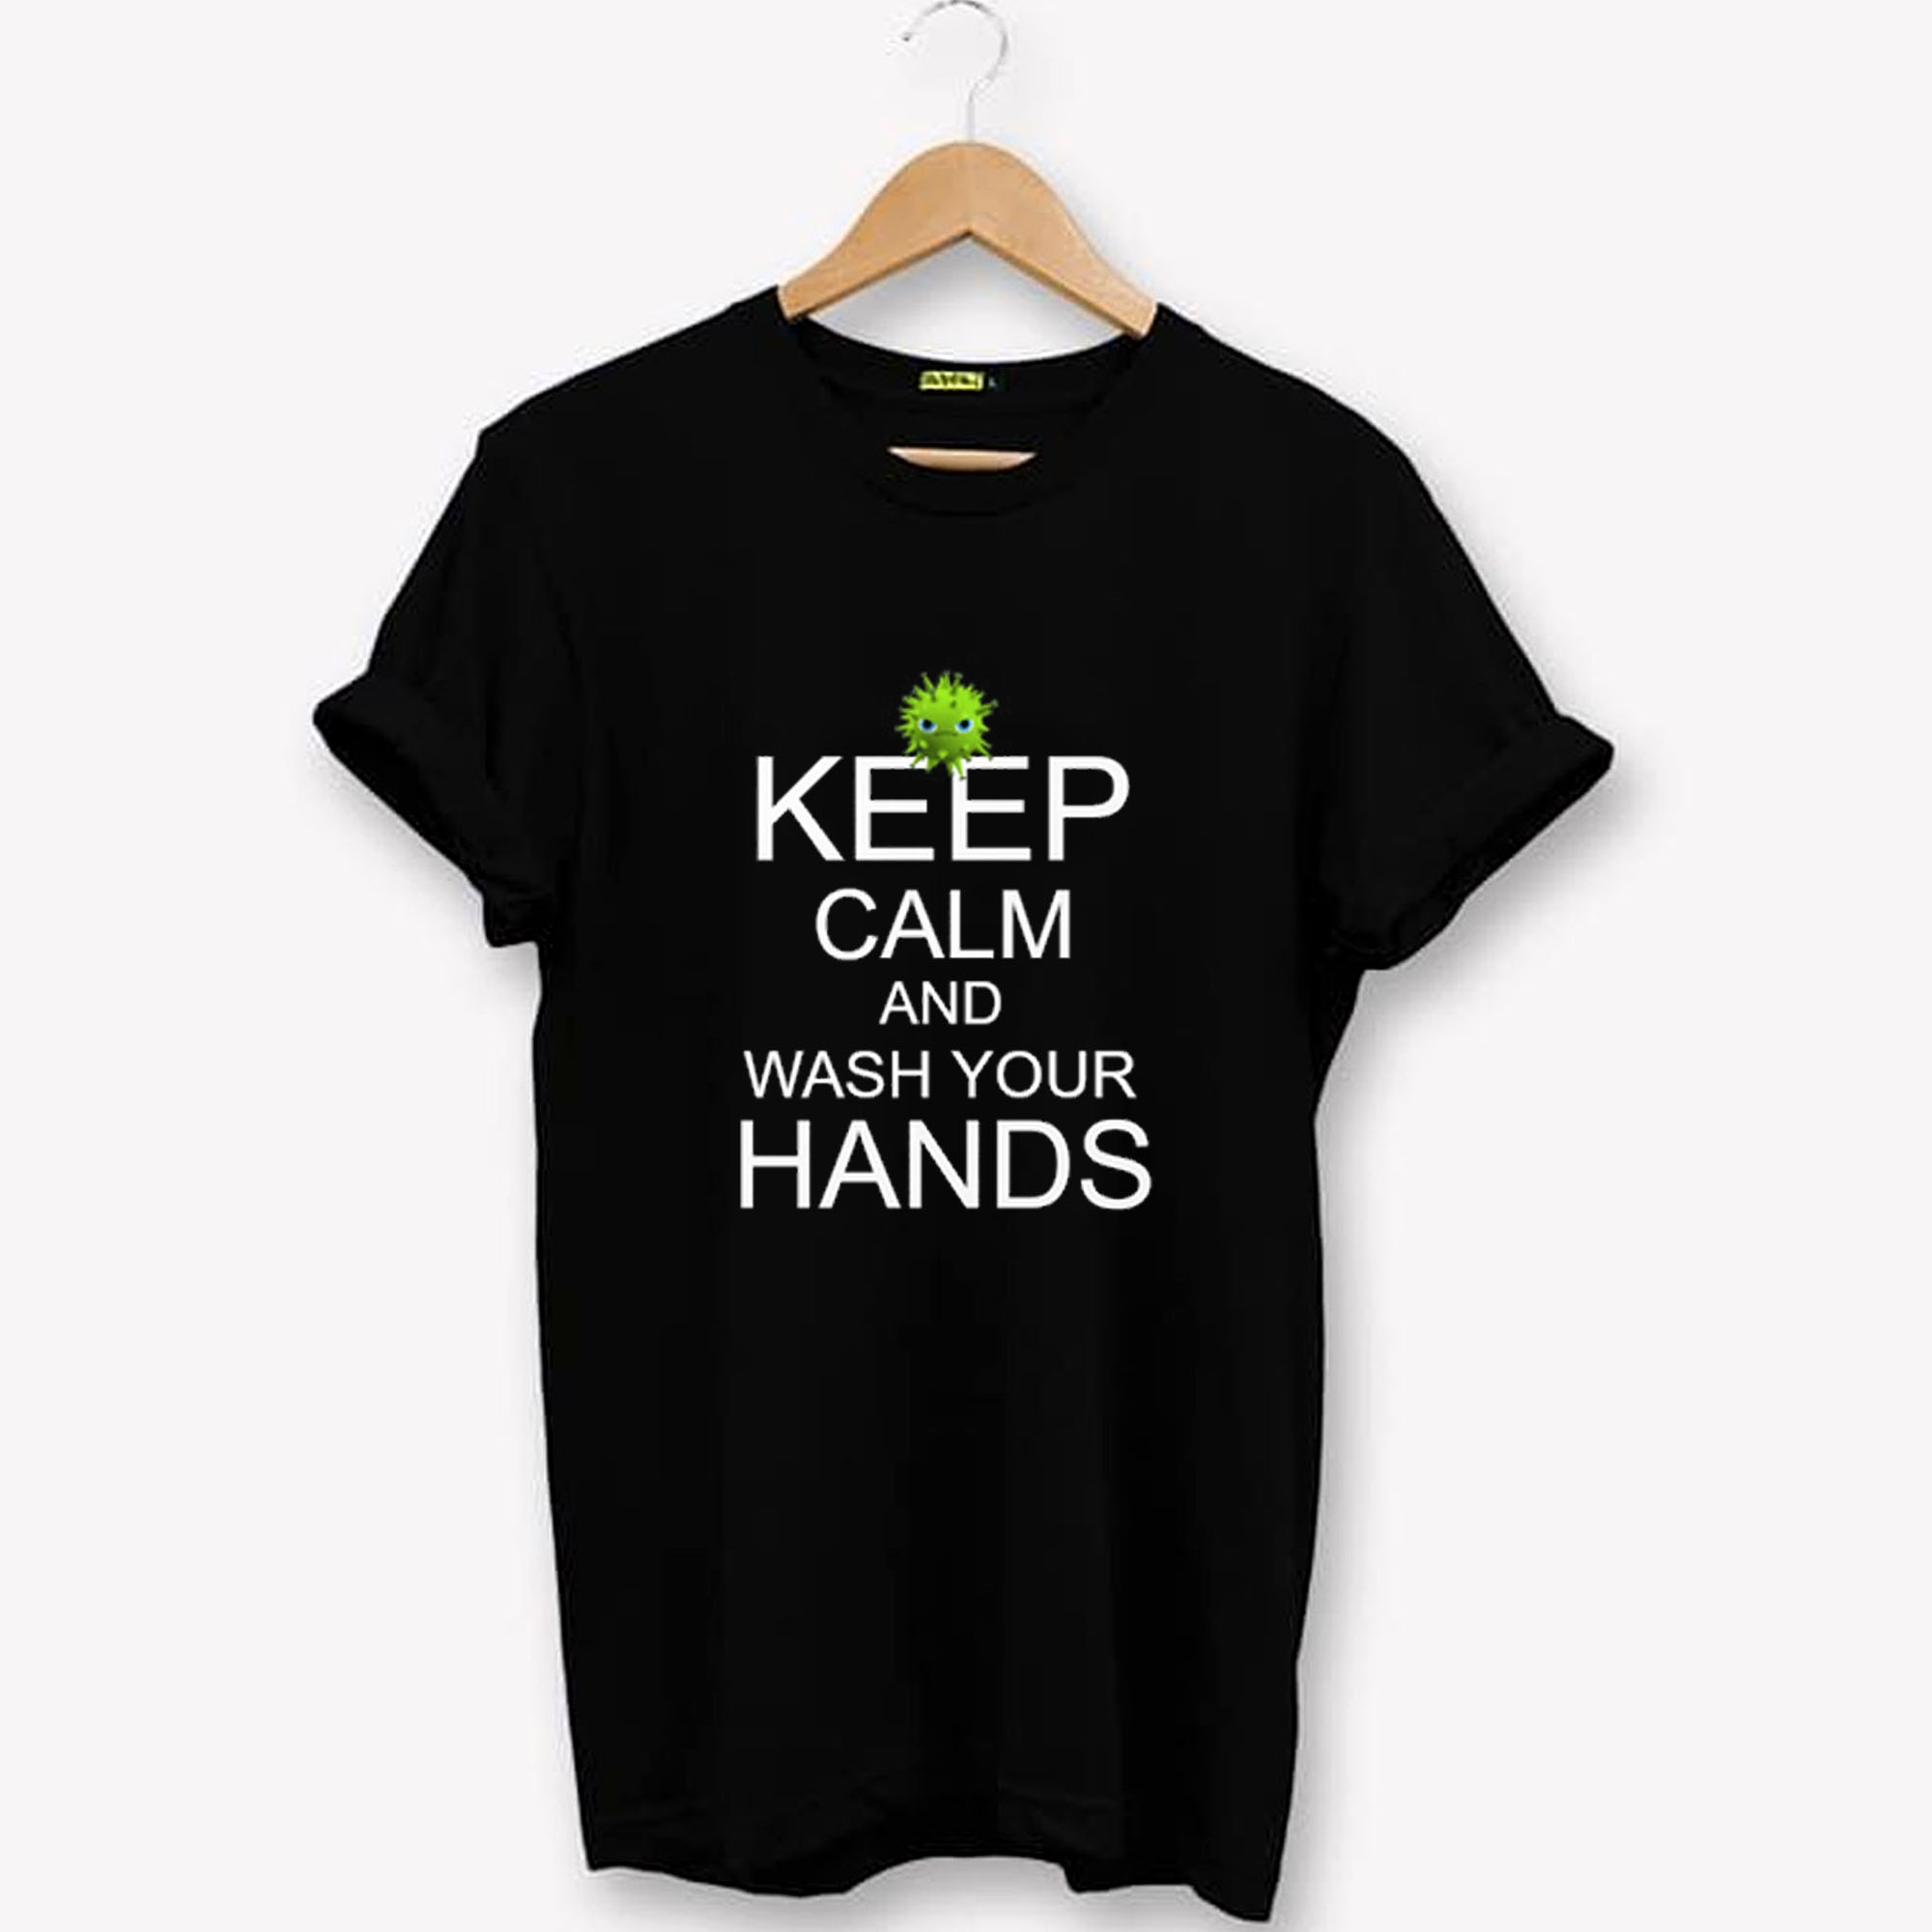 KEEP CALM AND WASH YOUR HANDS TSHIRT